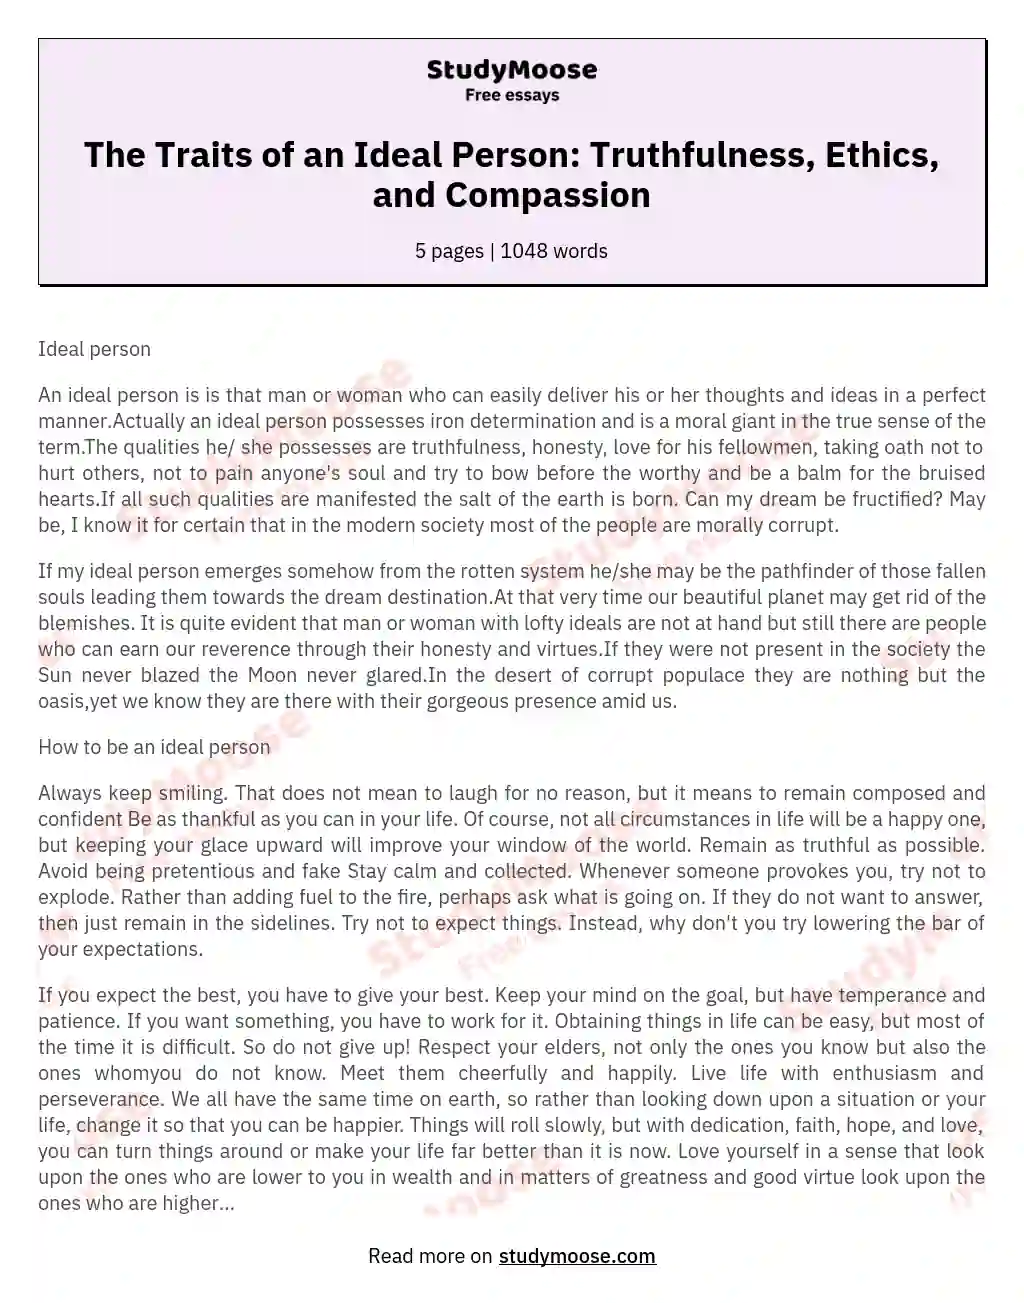 The Traits of an Ideal Person: Truthfulness, Ethics, and Compassion essay